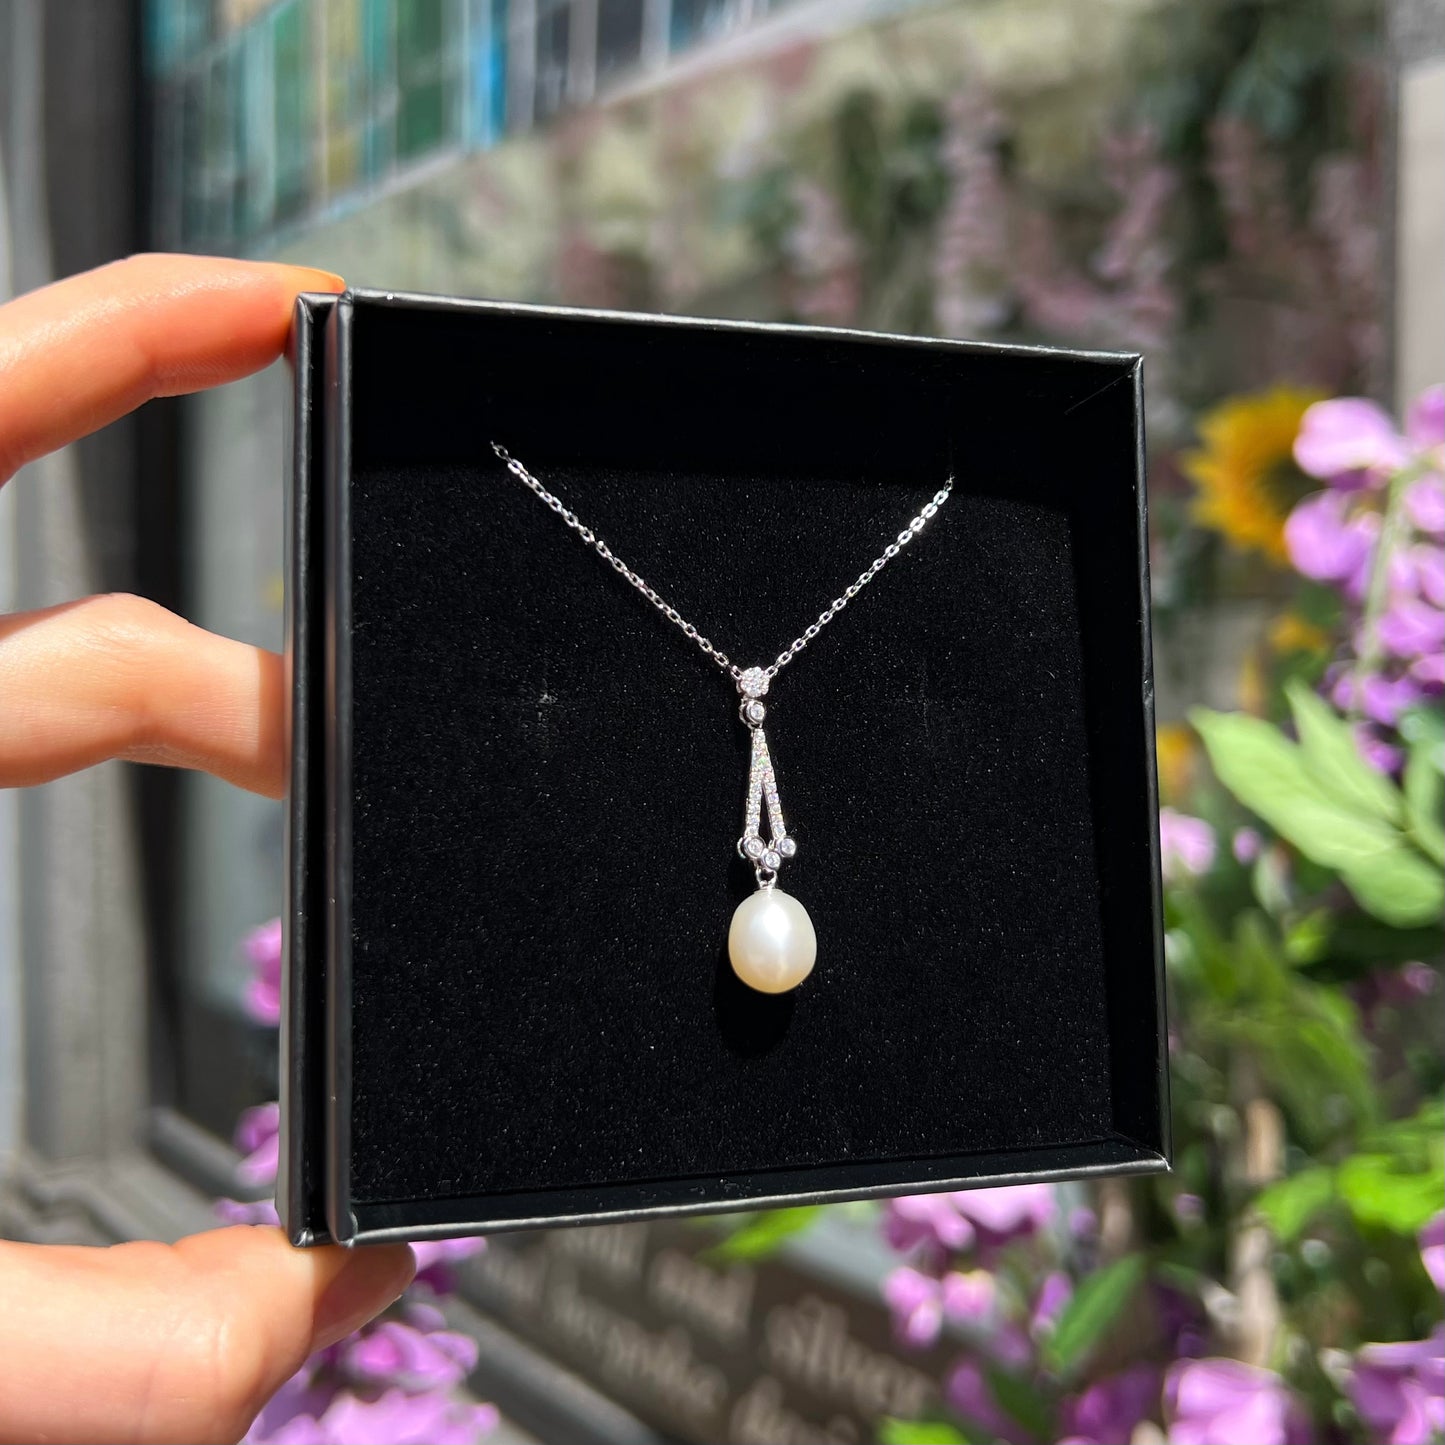 Sterling silver, cubic zirconia, and pearl pendant with chain